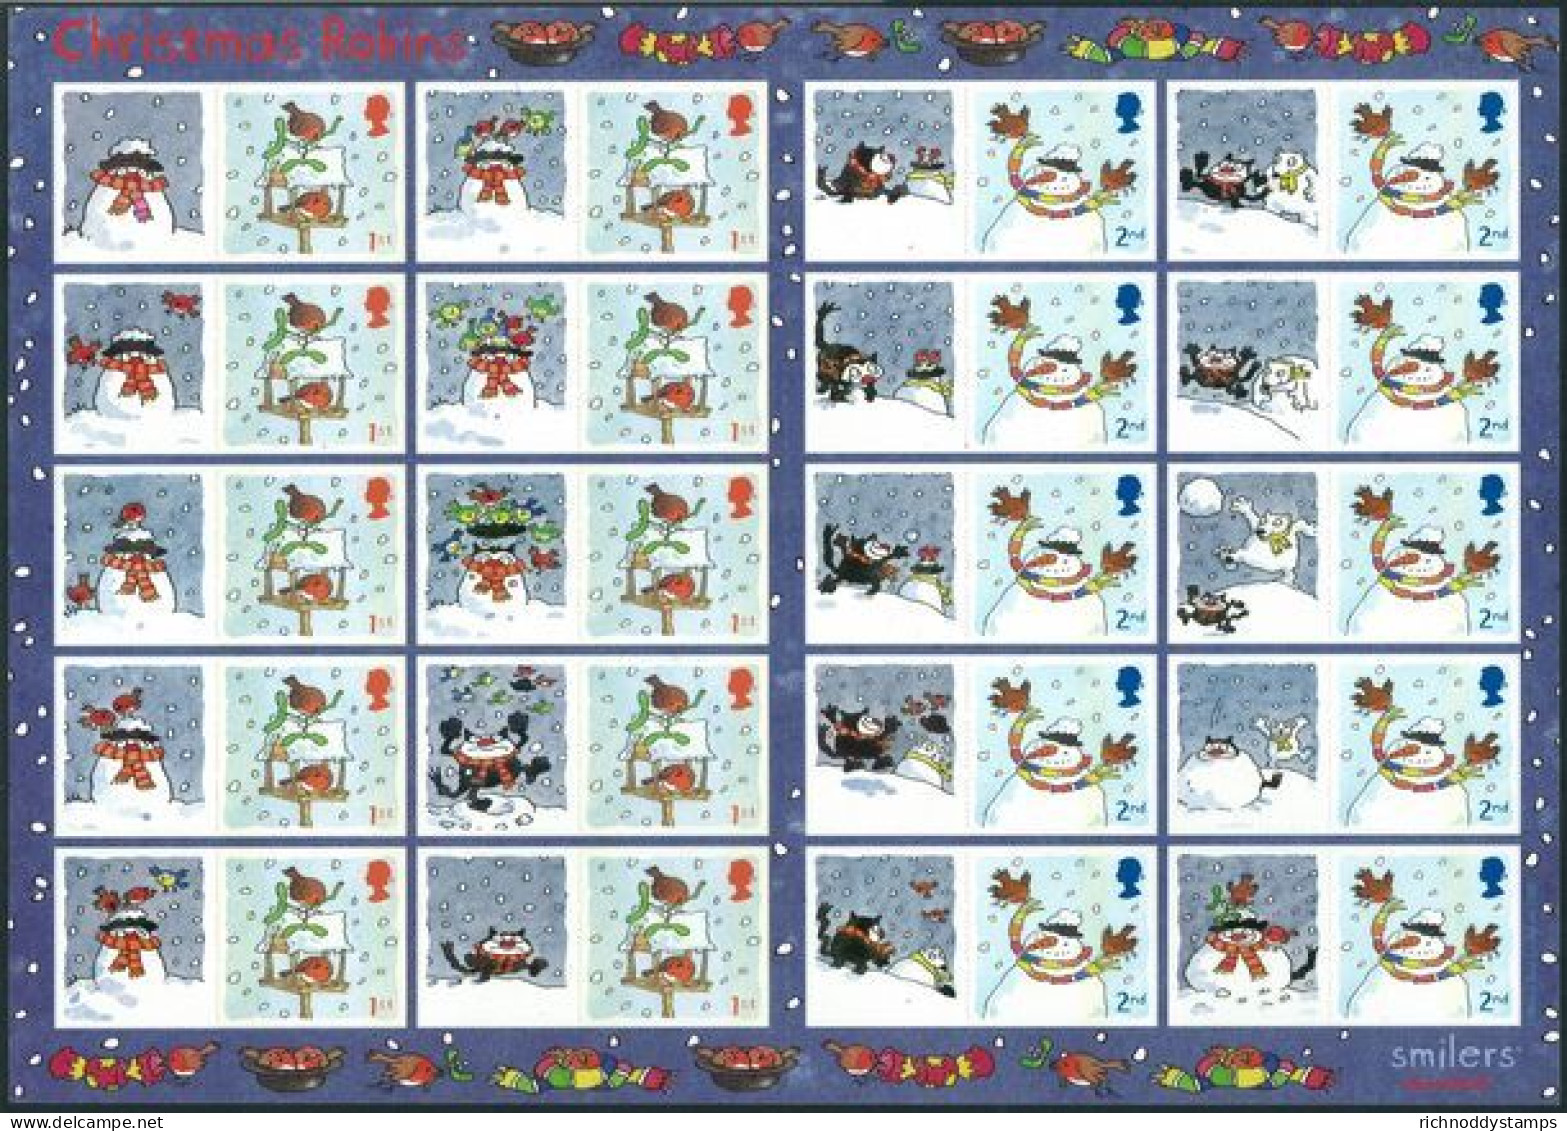 2005 Christmas Robins Smilers Sheet Unmounted Mint.  - Timbres Personnalisés